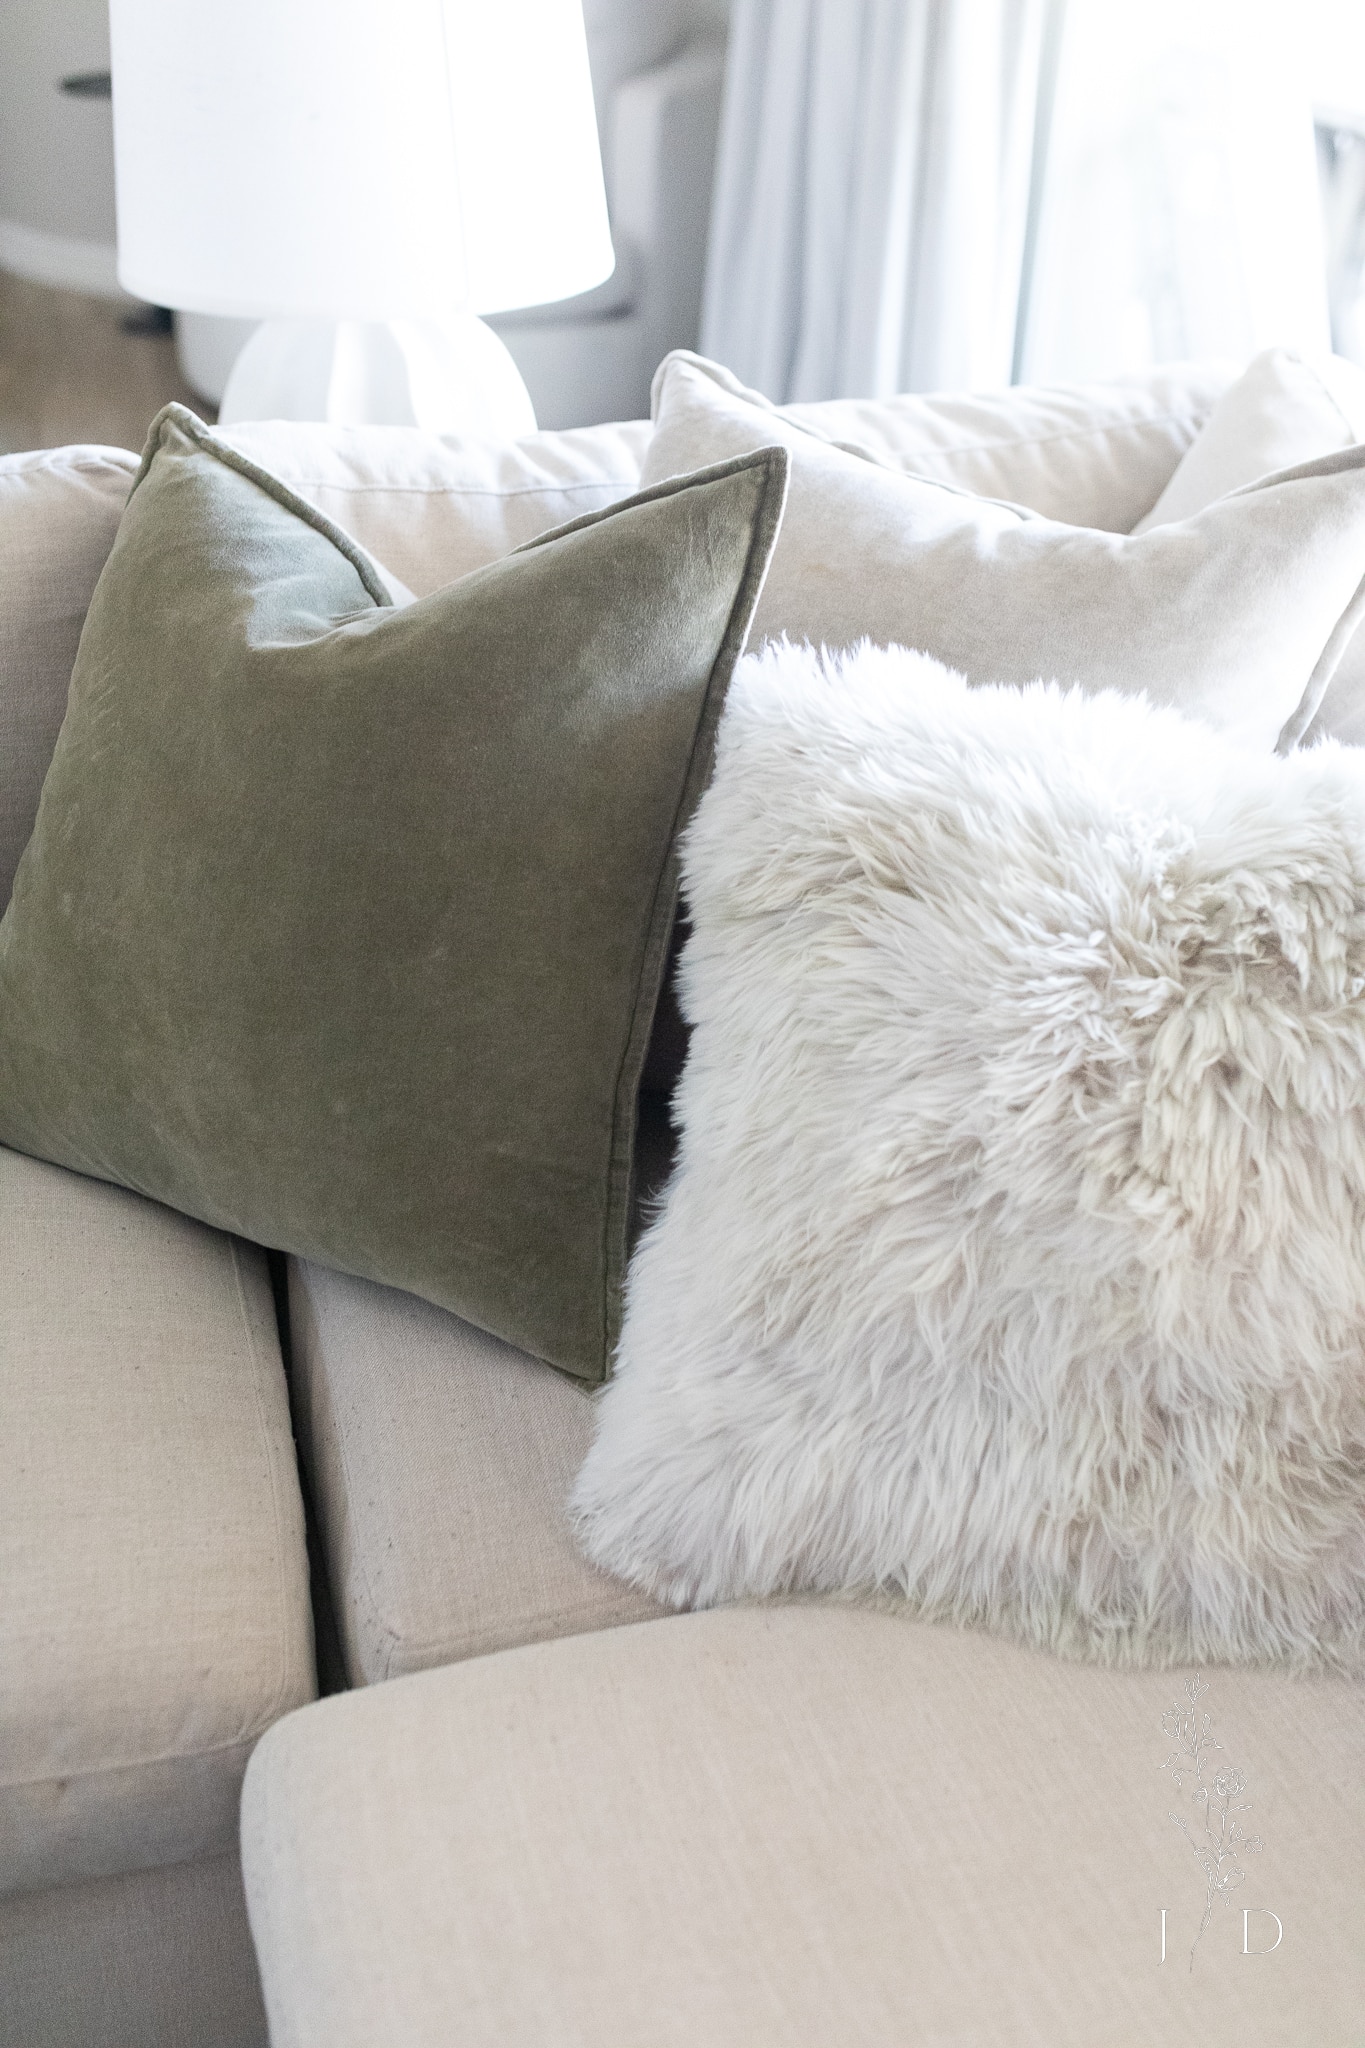 Arhaus pillows in different textures and colors. 